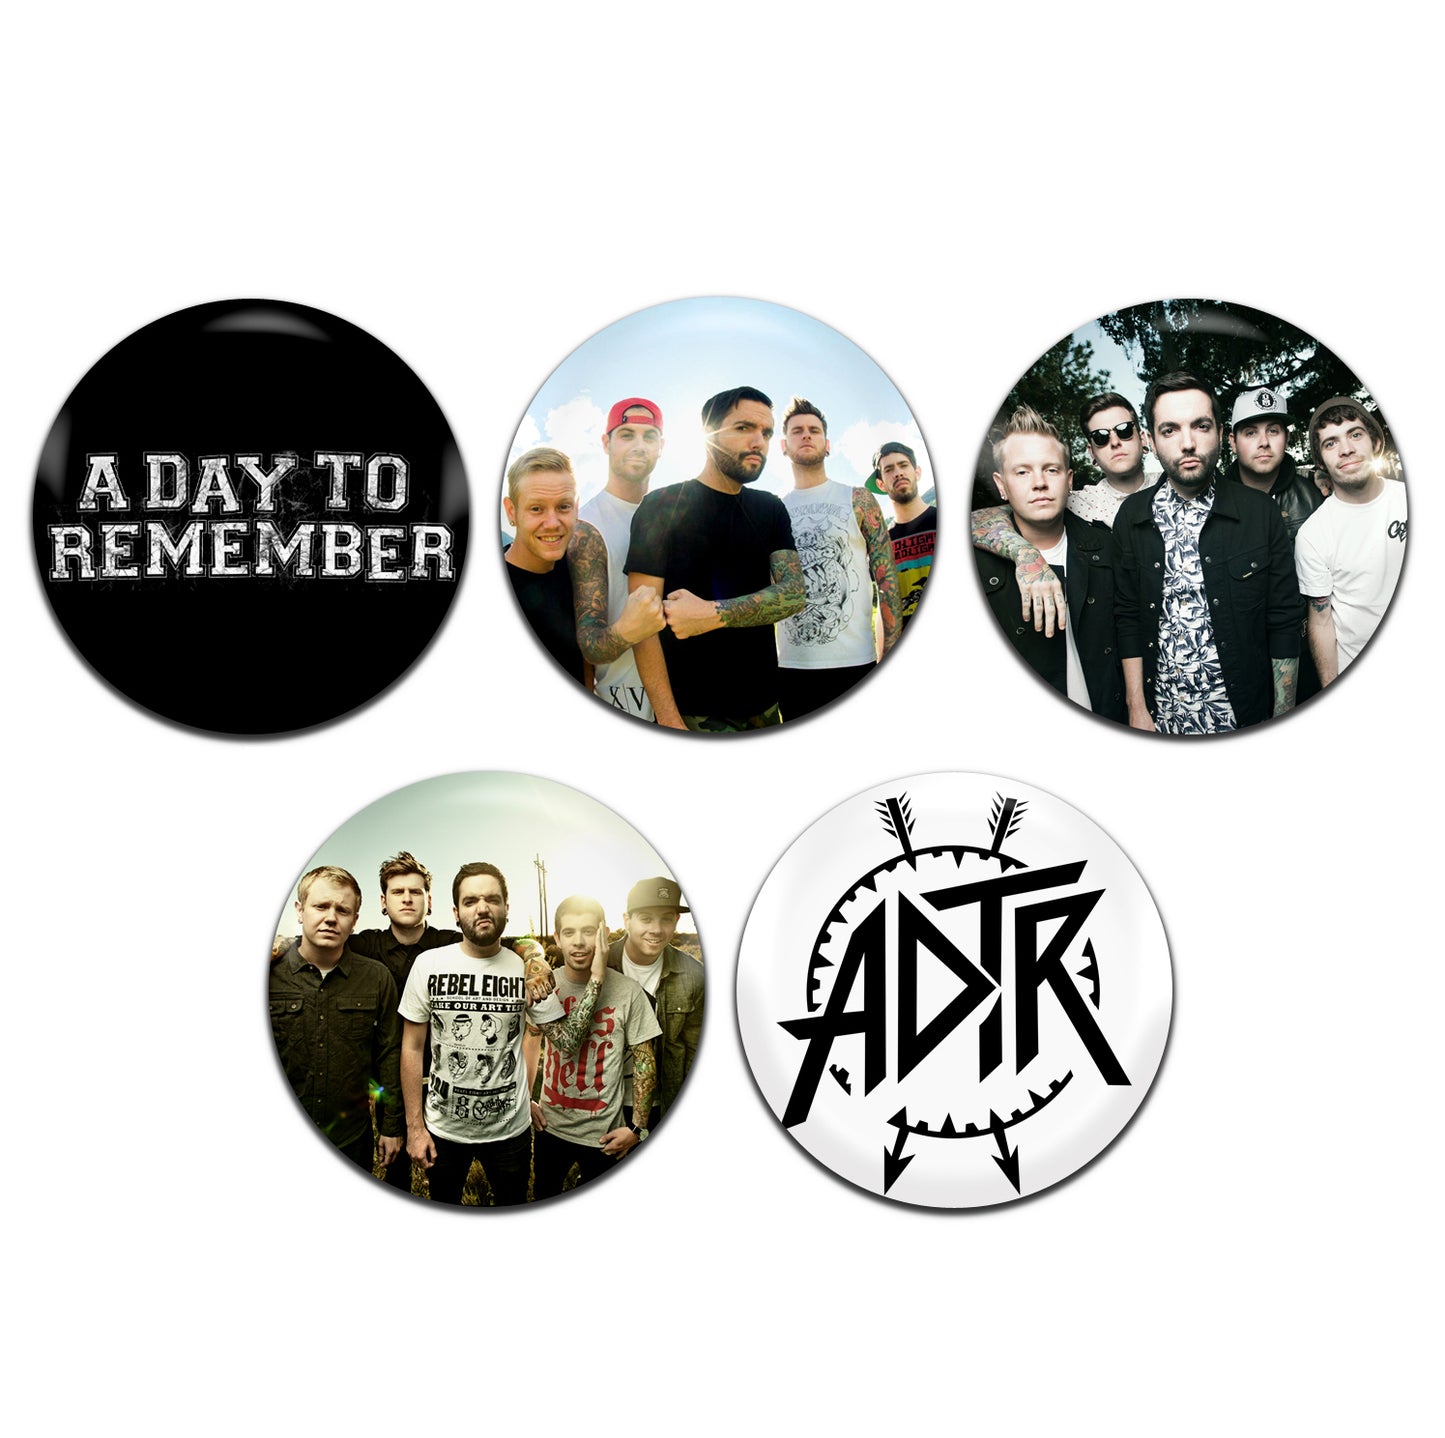 A Day To Remember Metalcore Pop-Punk Alternative Rock Band 25mm / 1 Inch D-Pin Button Badges (5x Set)